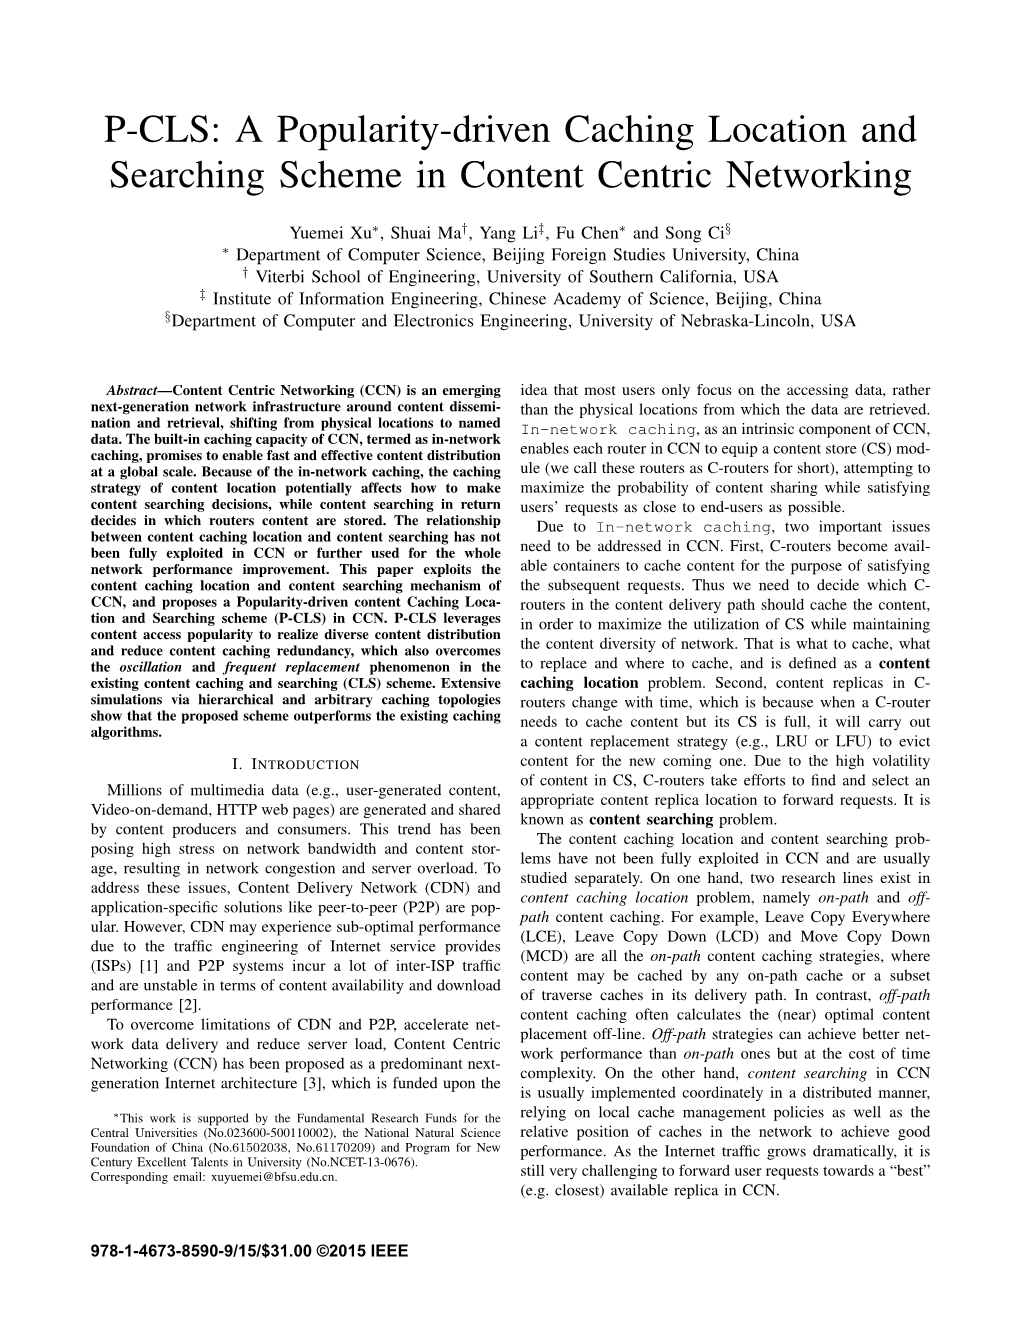 P-CLS: a Popularity-Driven Caching Location and Searching Scheme in Content Centric Networking